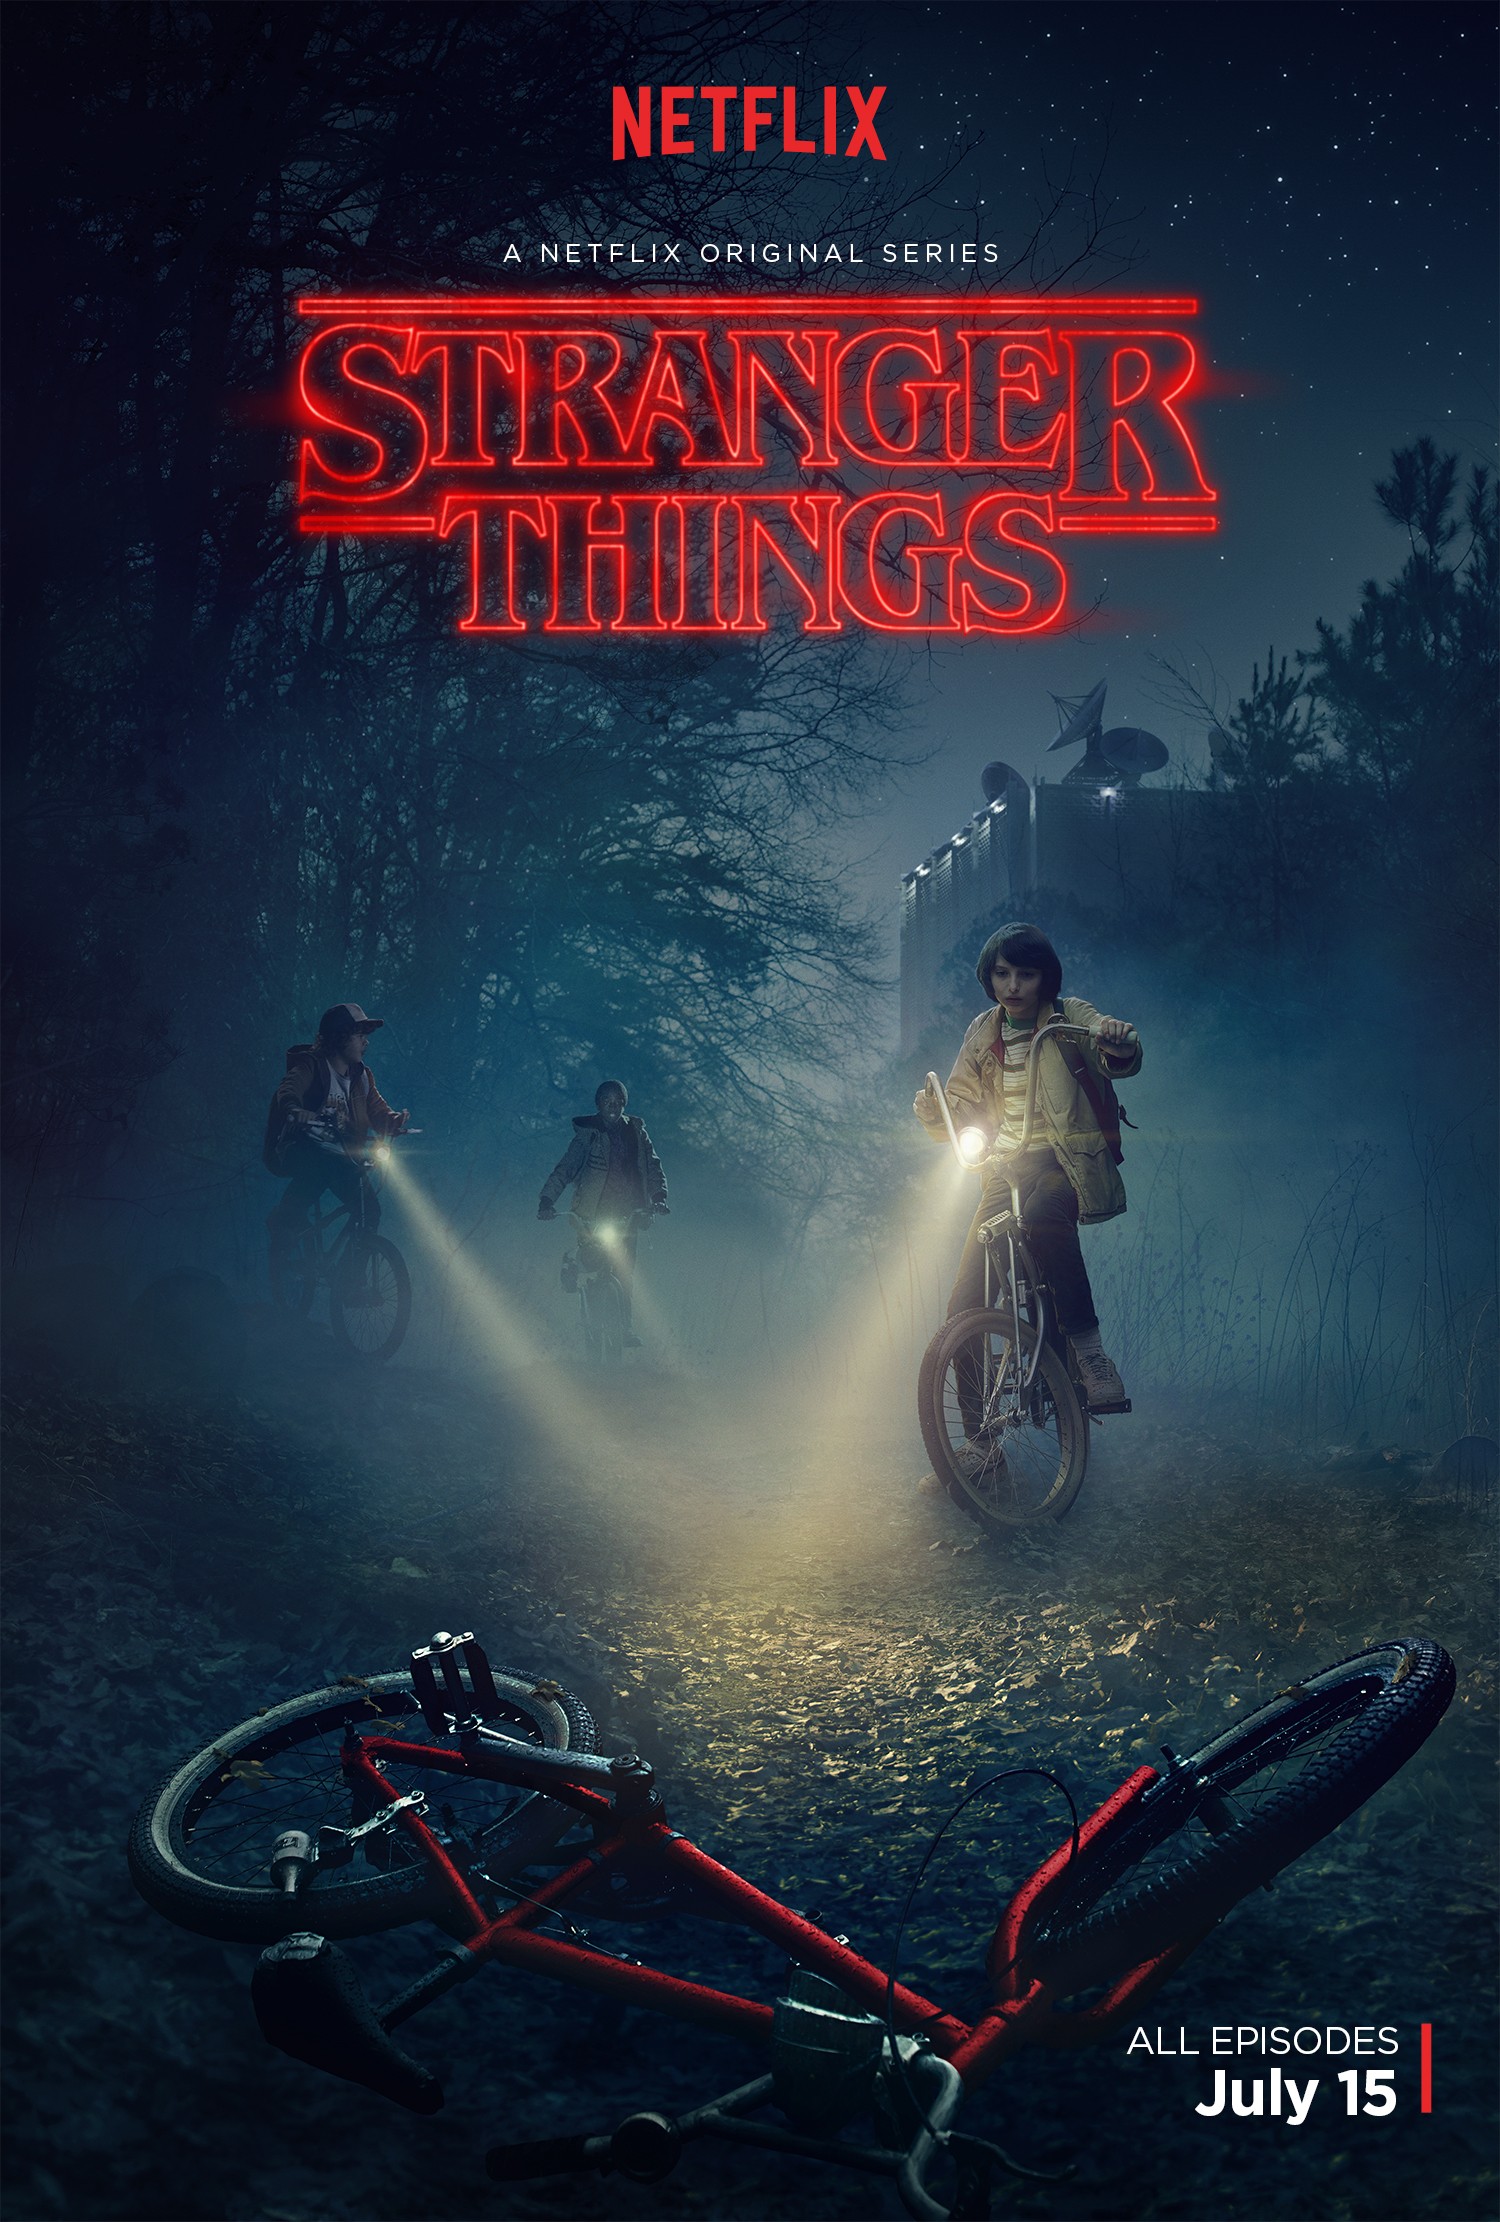 IMDb - Ready for Stranger Things? Take a look back at some of the films  that laid the groundwork for the popular Netflix series 👉